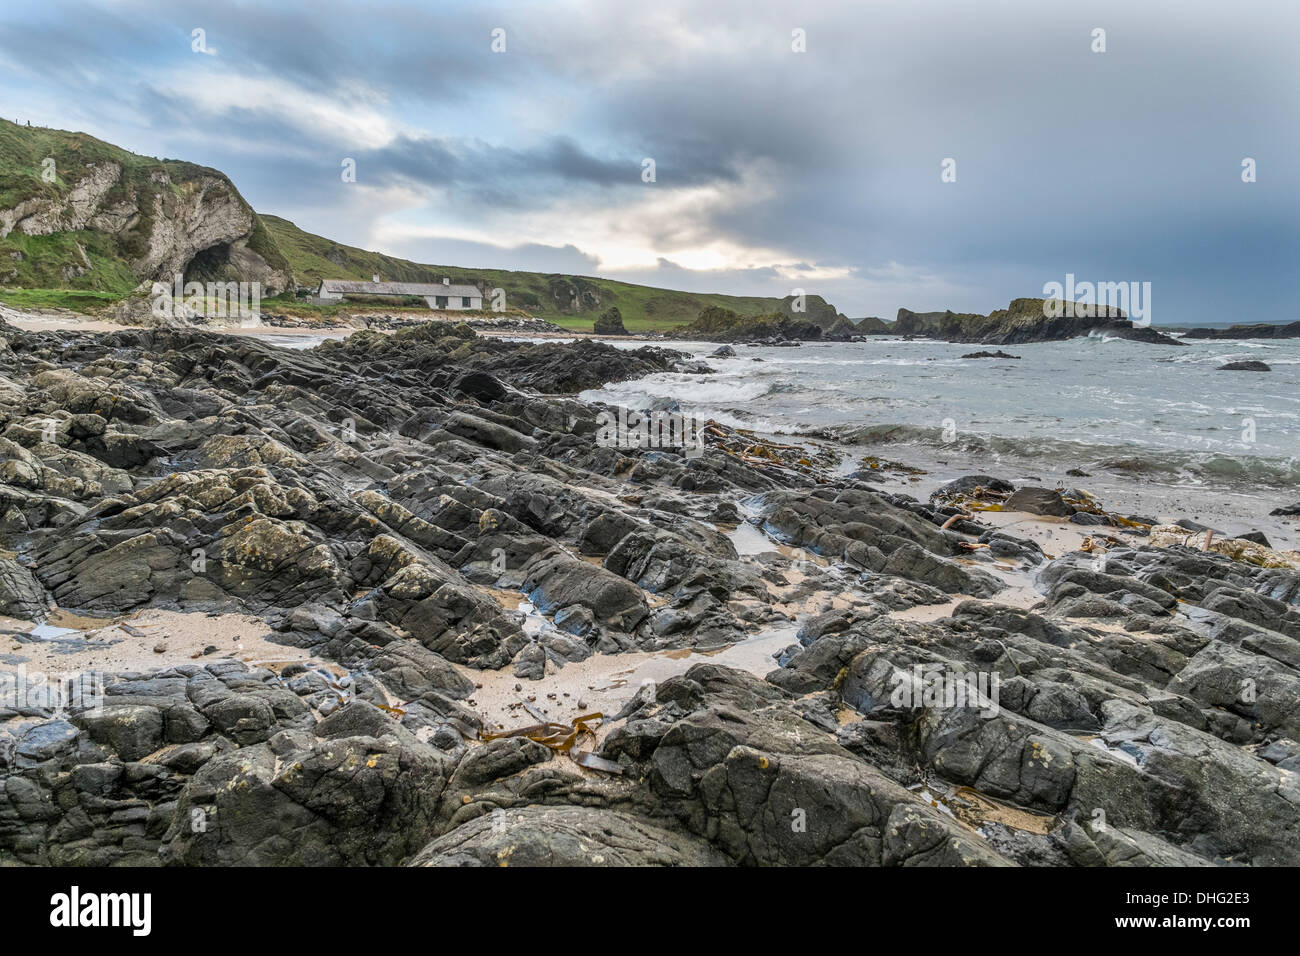 Coastal scene with cottage in the distance, rocky outcrop in the foreground beach. Stock Photo